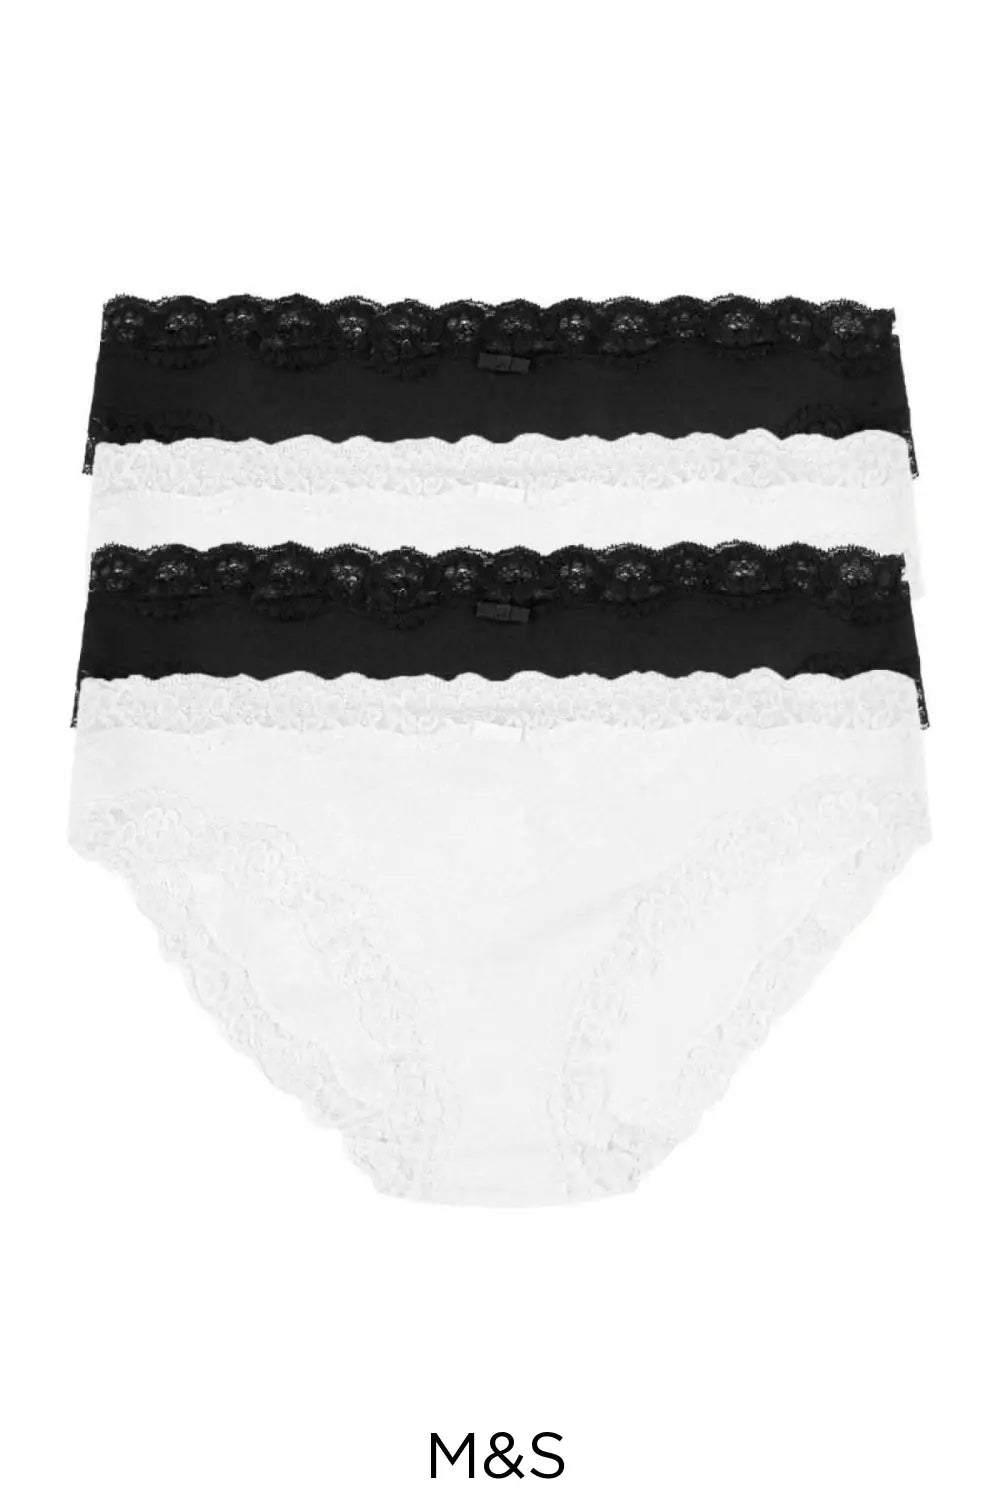 M&S Lace Knickers Black White (4 Pack) White/Black / 14